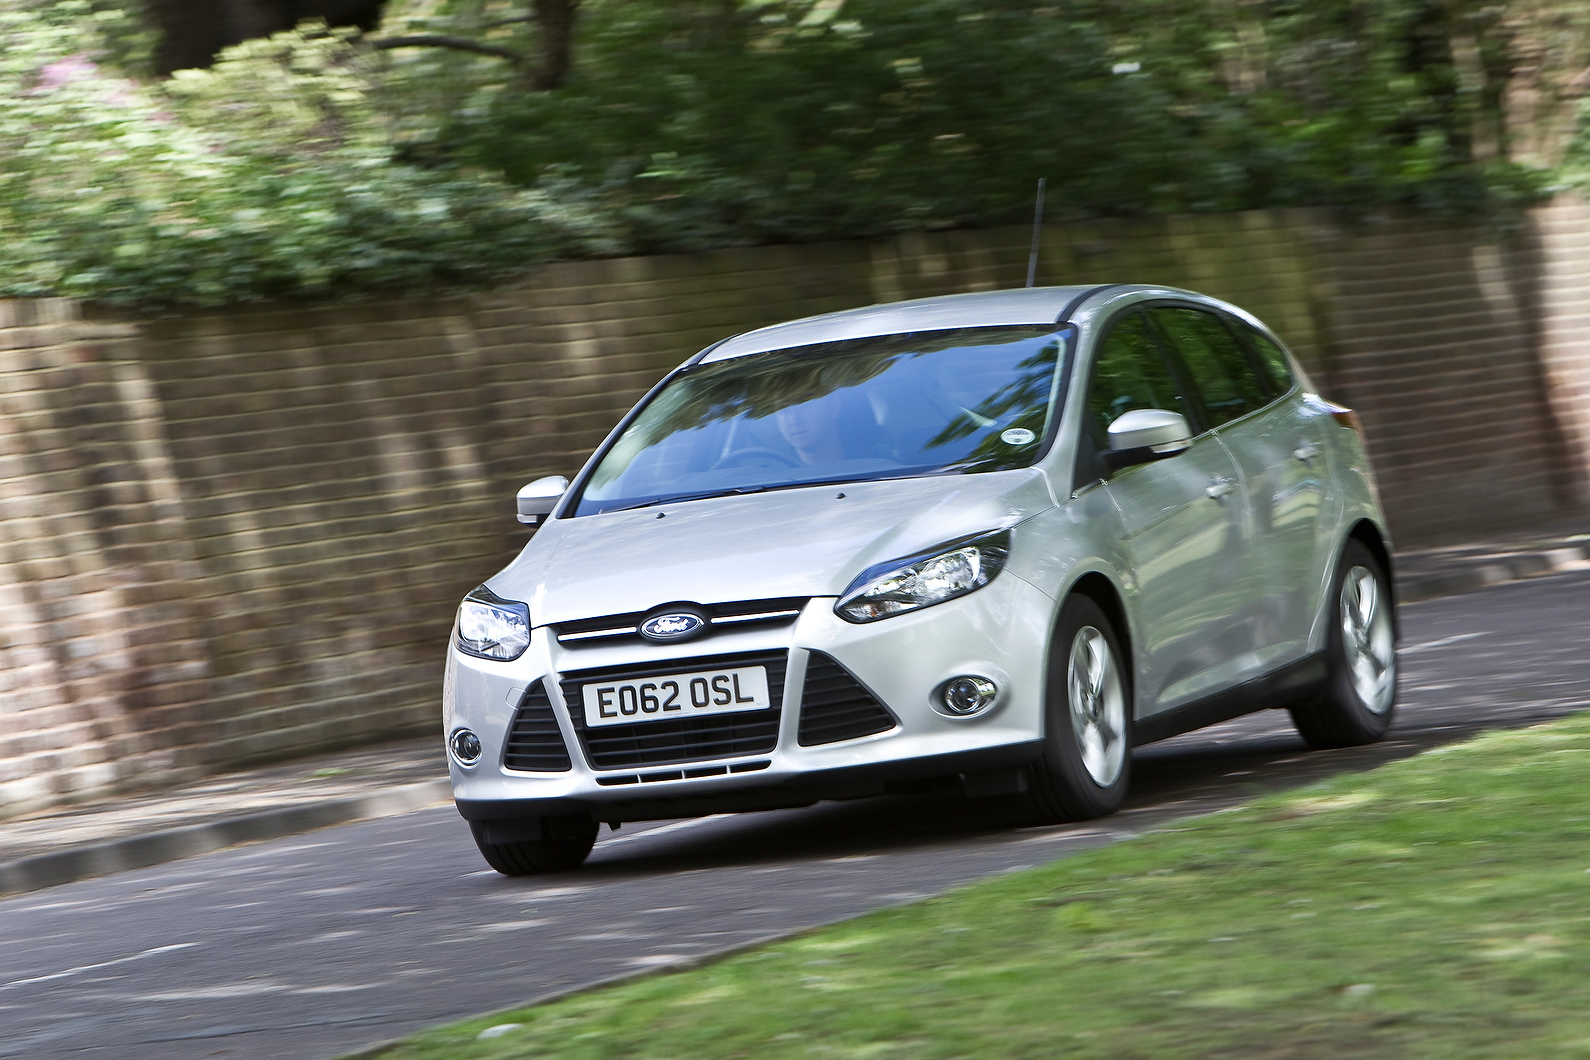 Ford focus 1.6 tdci econetic reviews #2